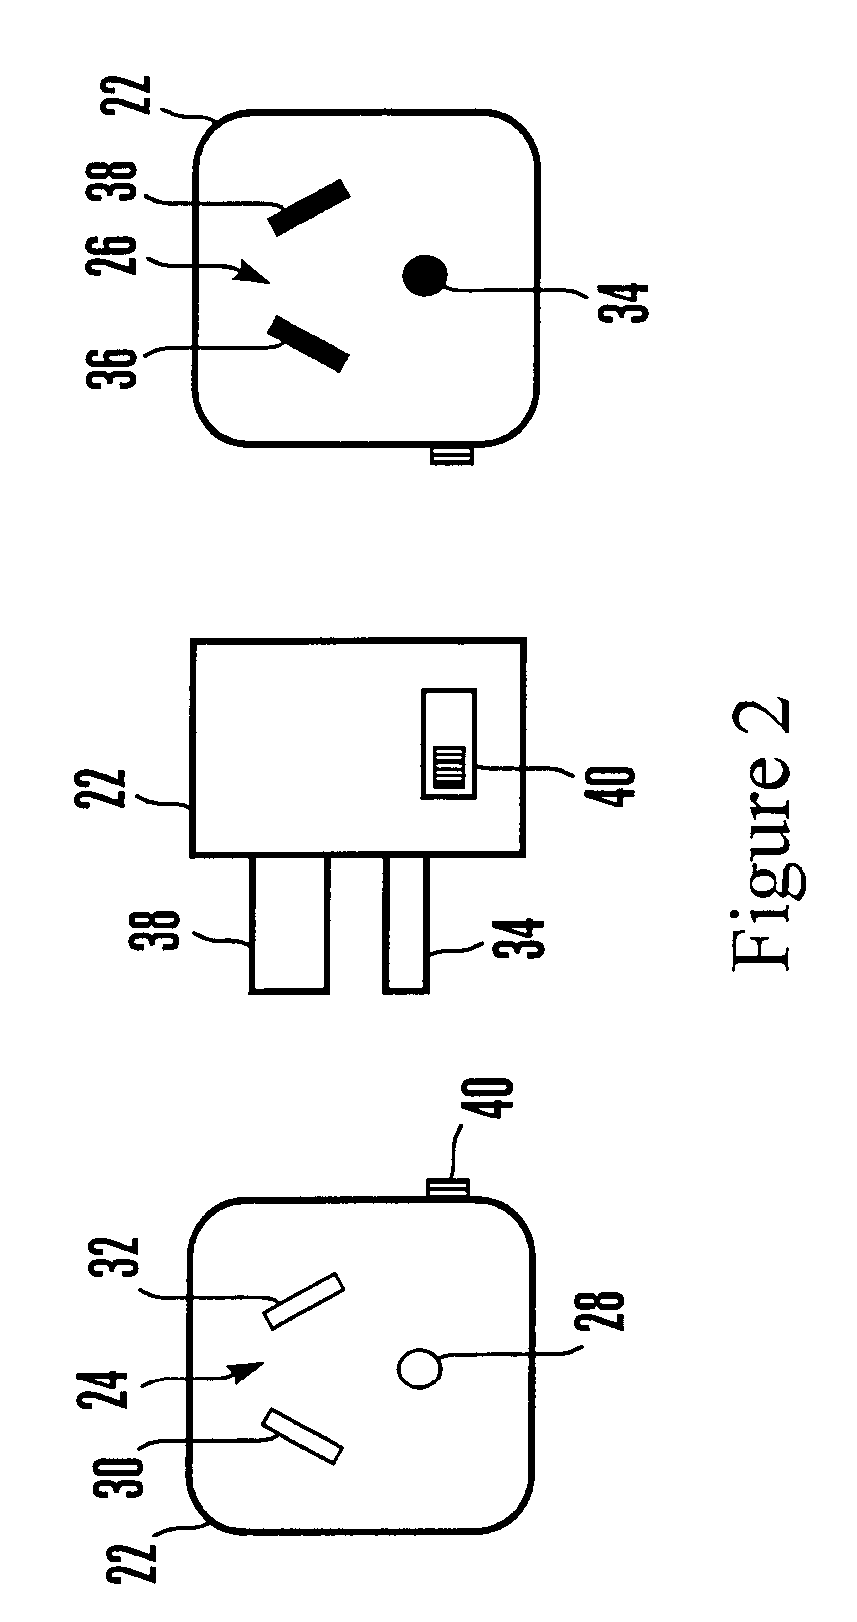 Cross-phase adapter for powerline communications (PLC) network